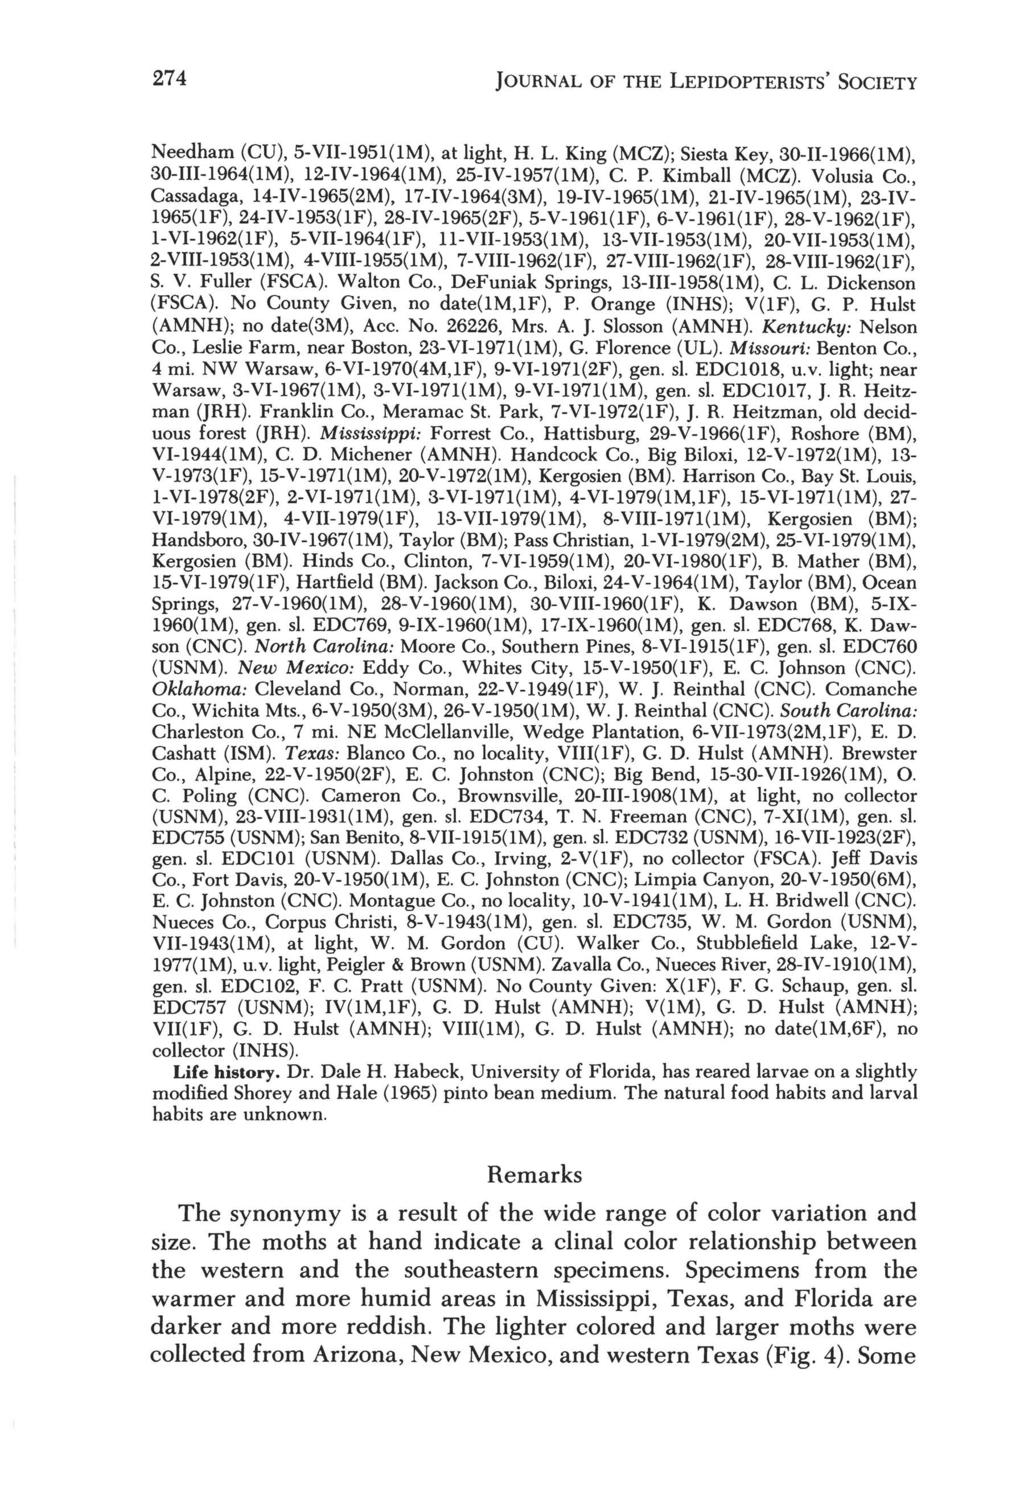 274 JOURNAL OF THE LEPIDOPTERISTS' SOCIETY Needham (CU), 5-VII-1951(lM), at light, H. L. King (MCZ); Siesta Key, 30-II-1966(lM), 30-III-1964(lM), 12-IV-1964(lM), 25-IV-1957(lM), c. P. Kimball (MCZ).